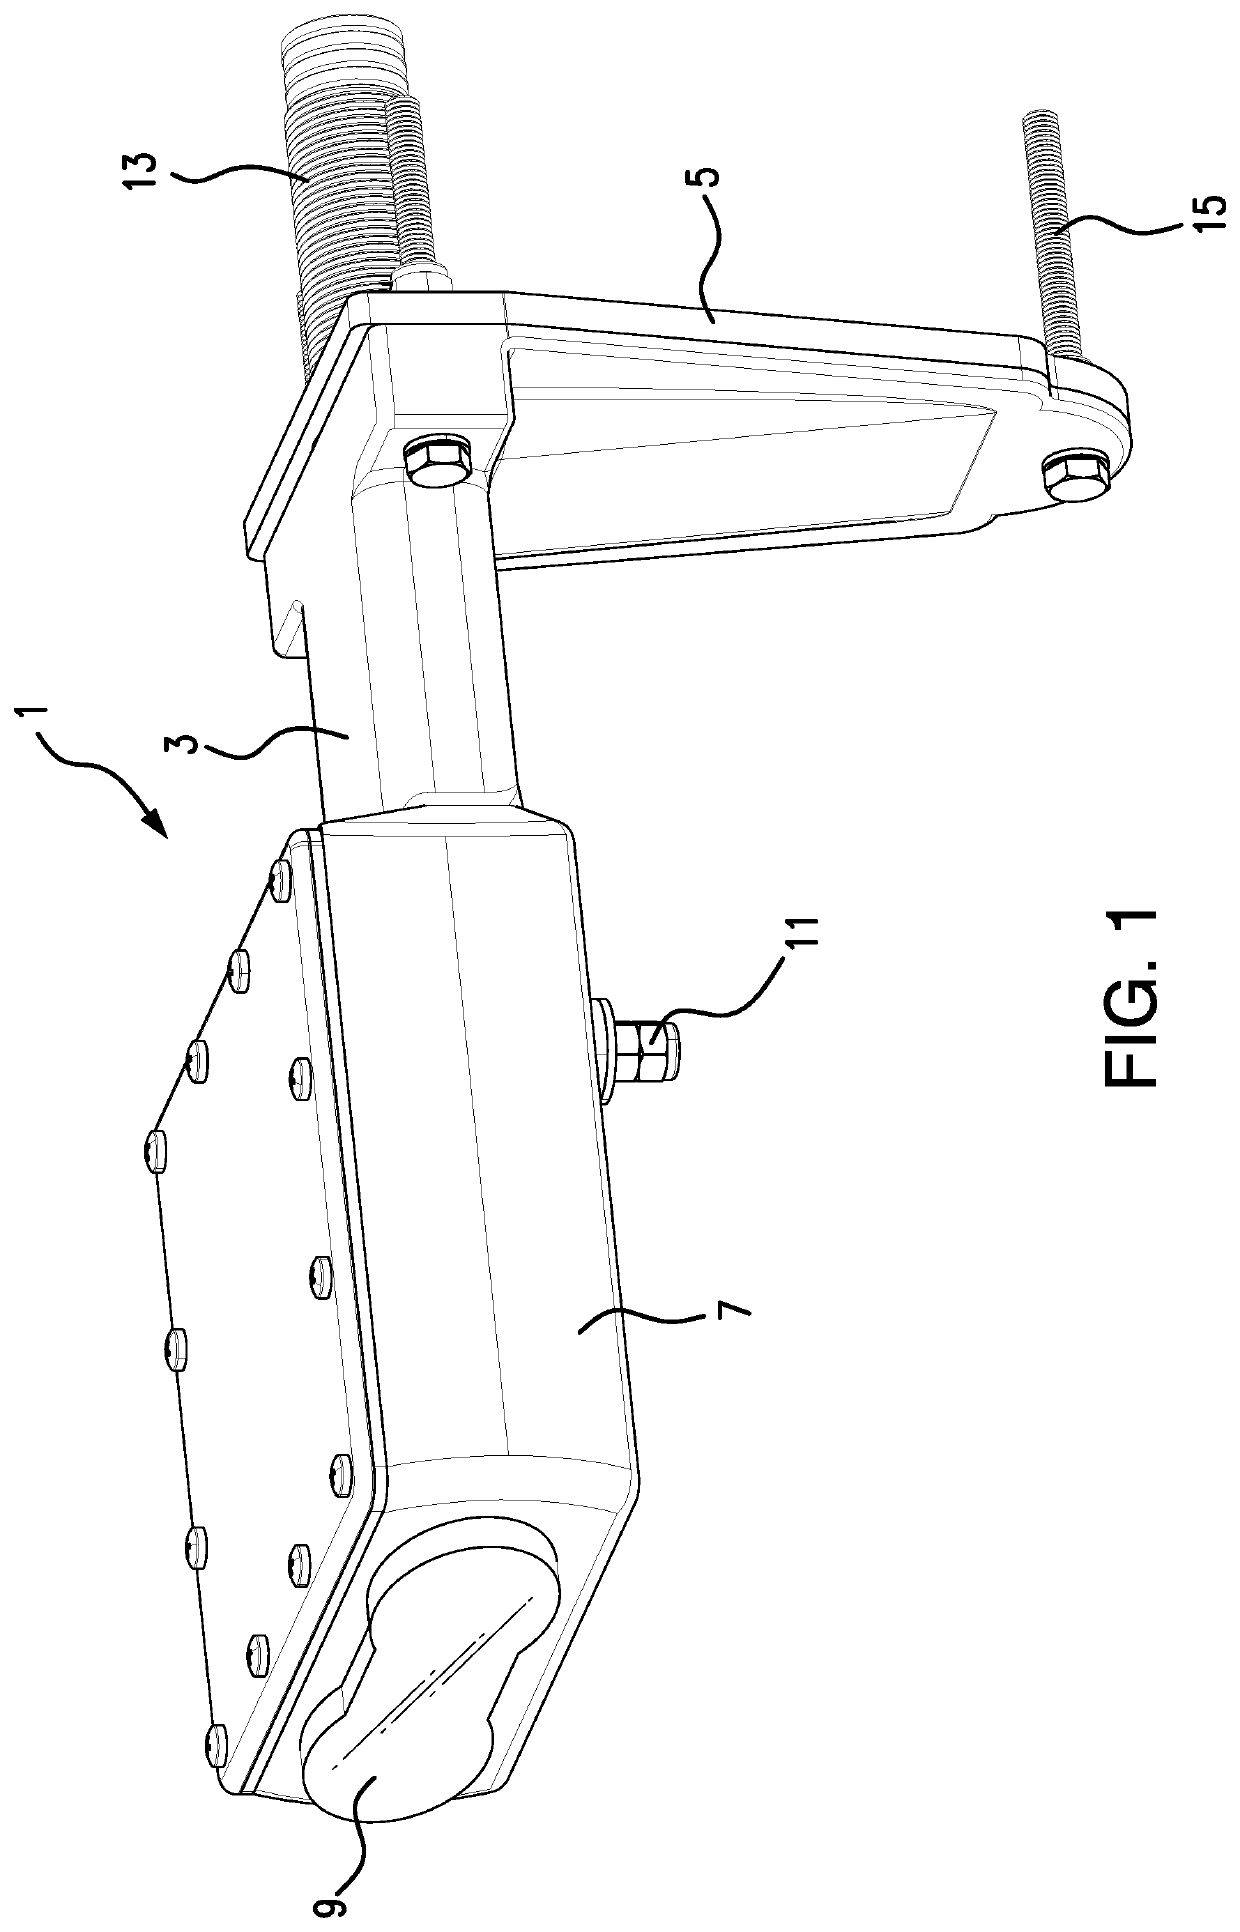 Bracket for mounting a thruster to a boat